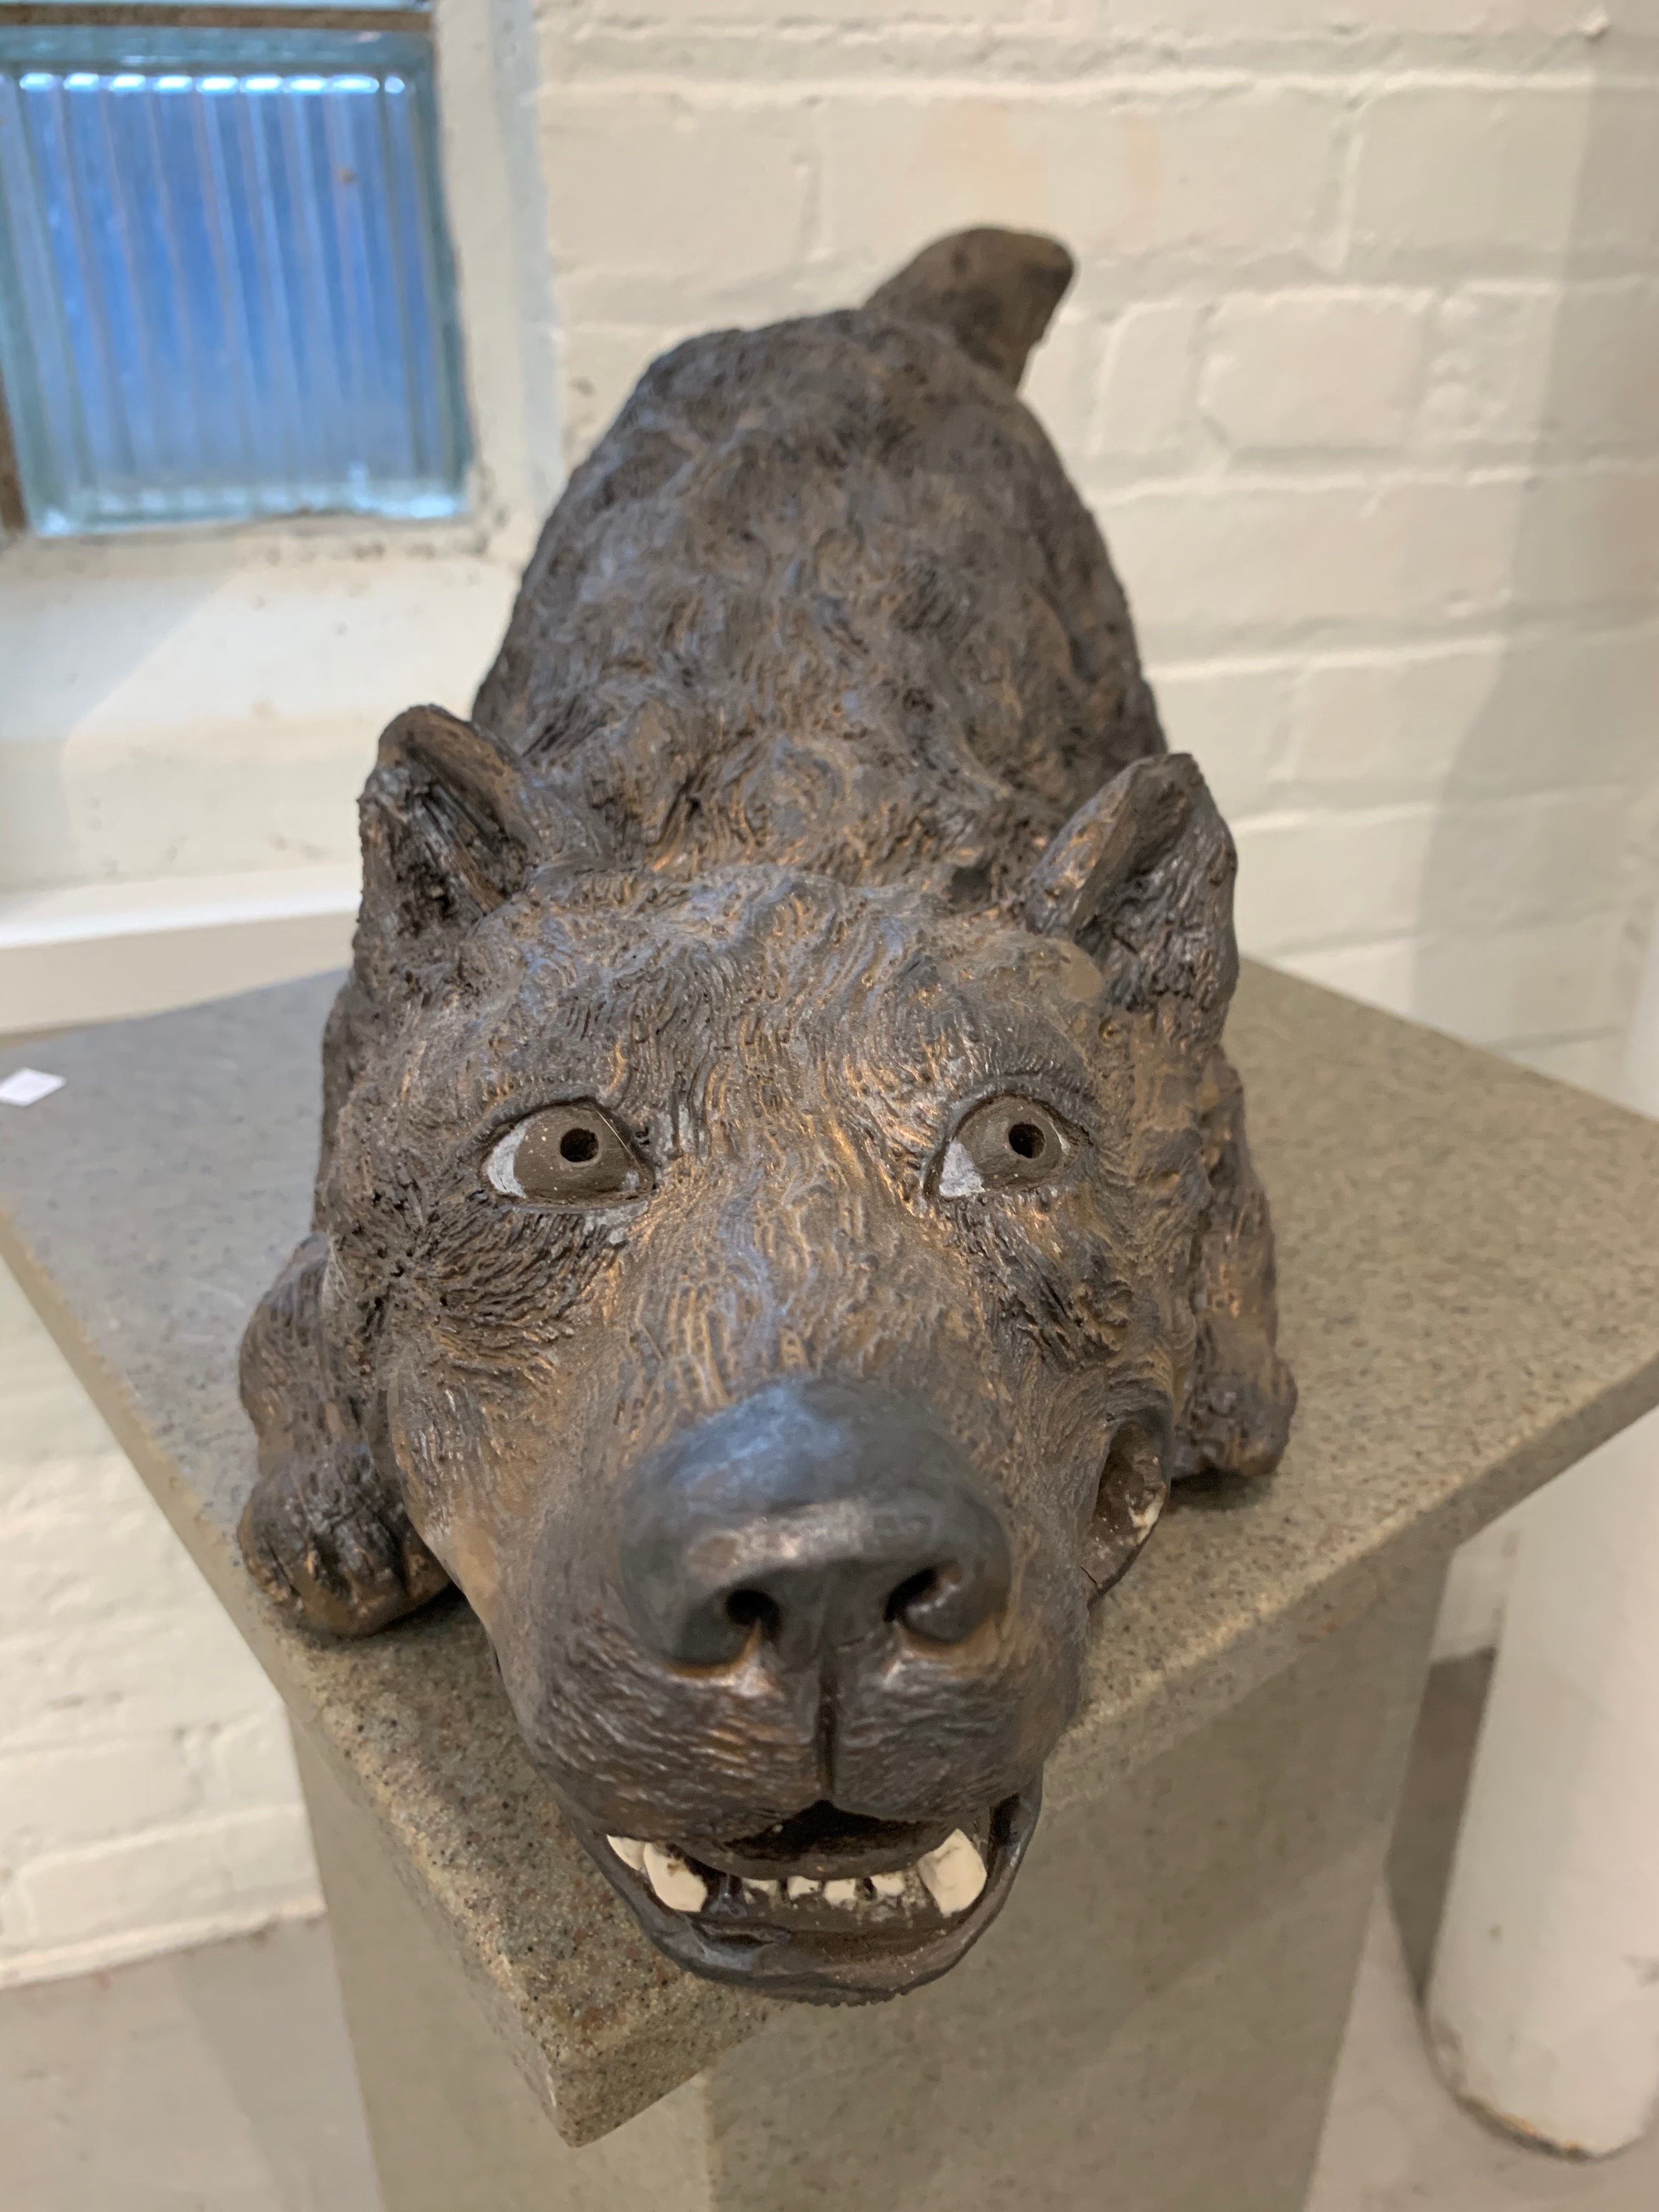 Kristen Newell's glazed ceramic sculpture, "Dog,'' growls playfully in a a holiday season exhibition at Abattoir gallery.